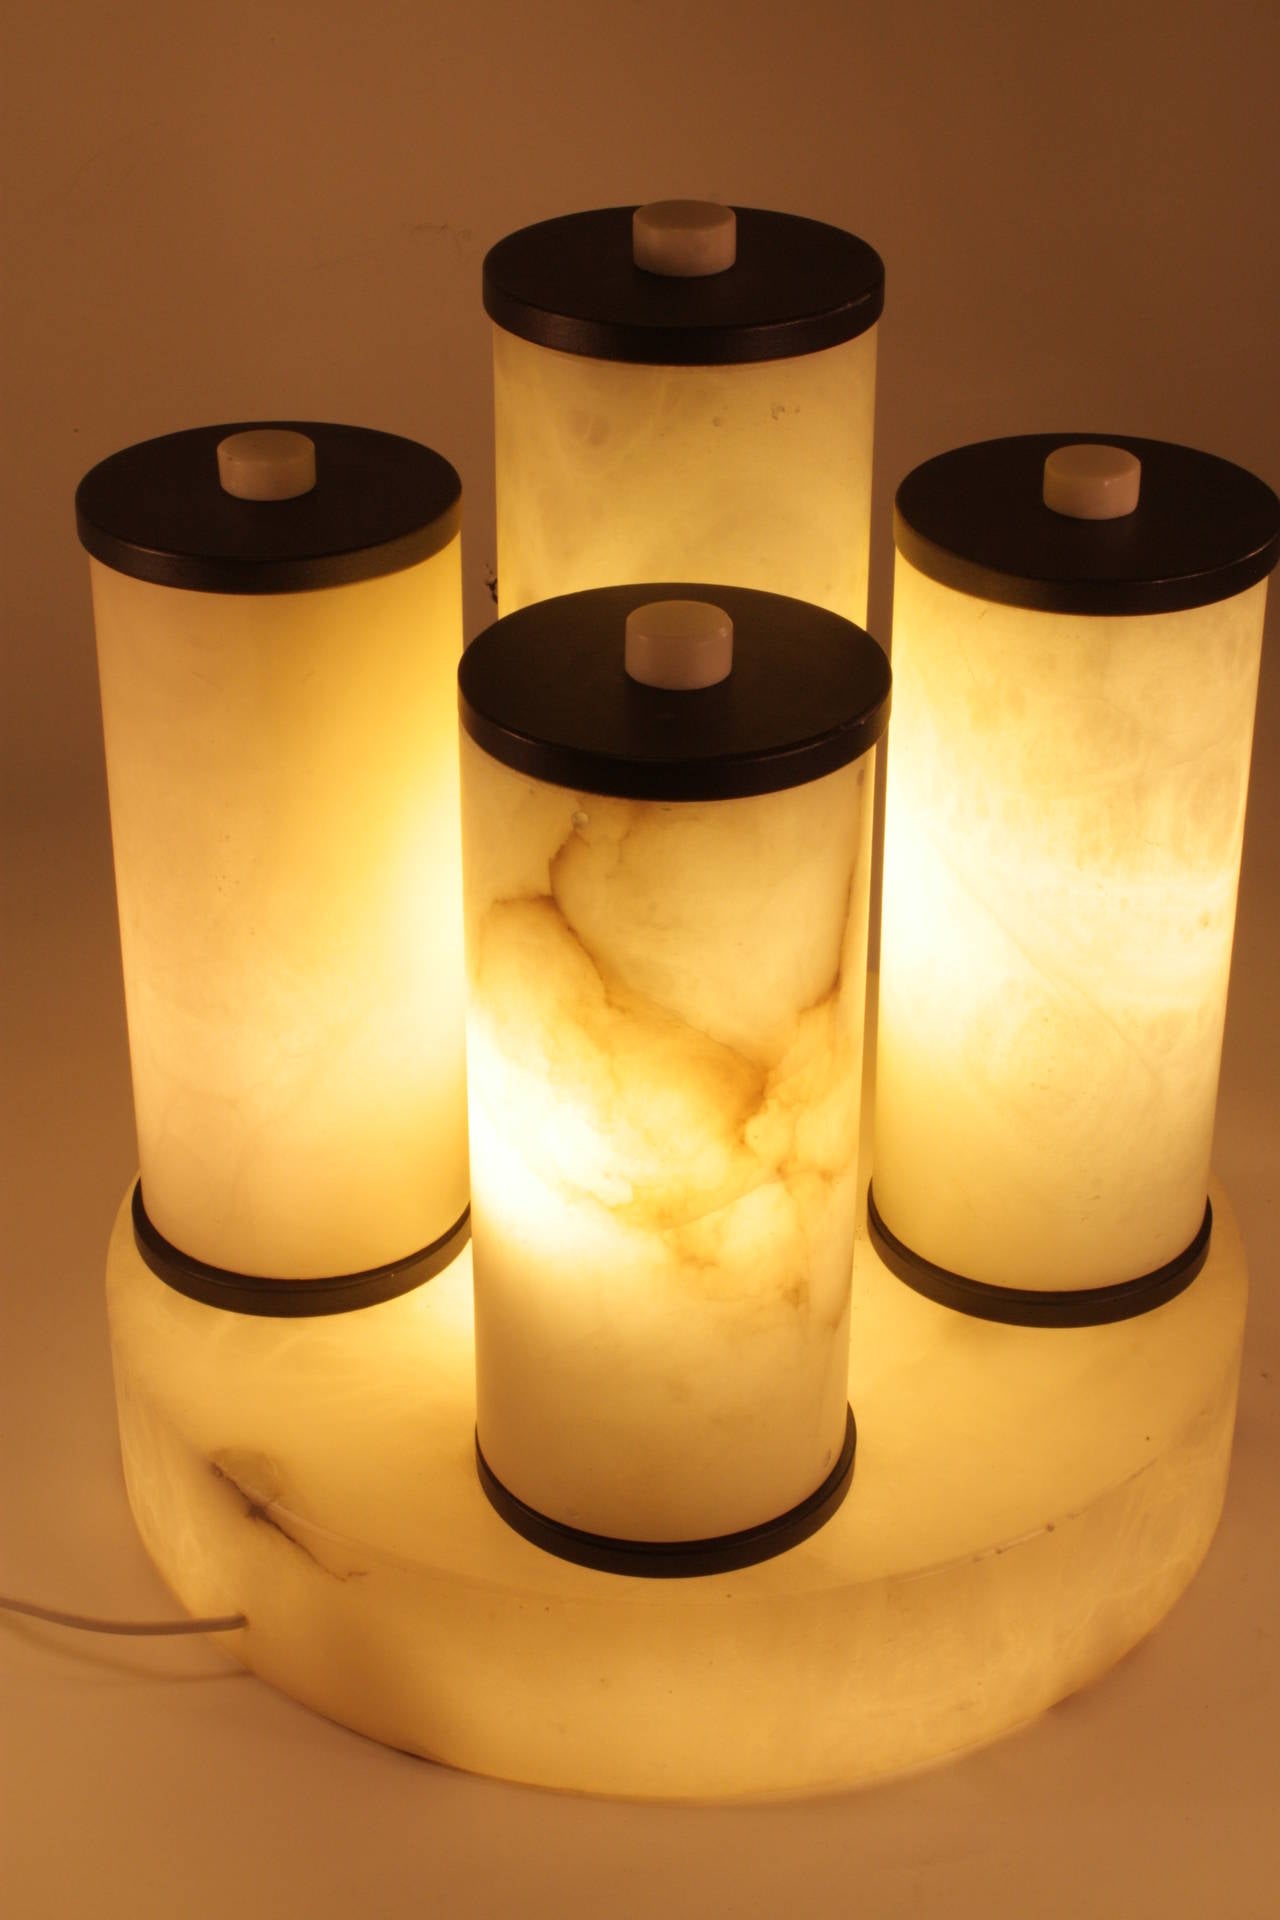 Bauhaus style design alabaster cylinders lamp, five alabaster cylinders with light, the base has also light. Top and bottom black pieces of resin. Top button pieces of alabaster. Six bulb, new rewired.